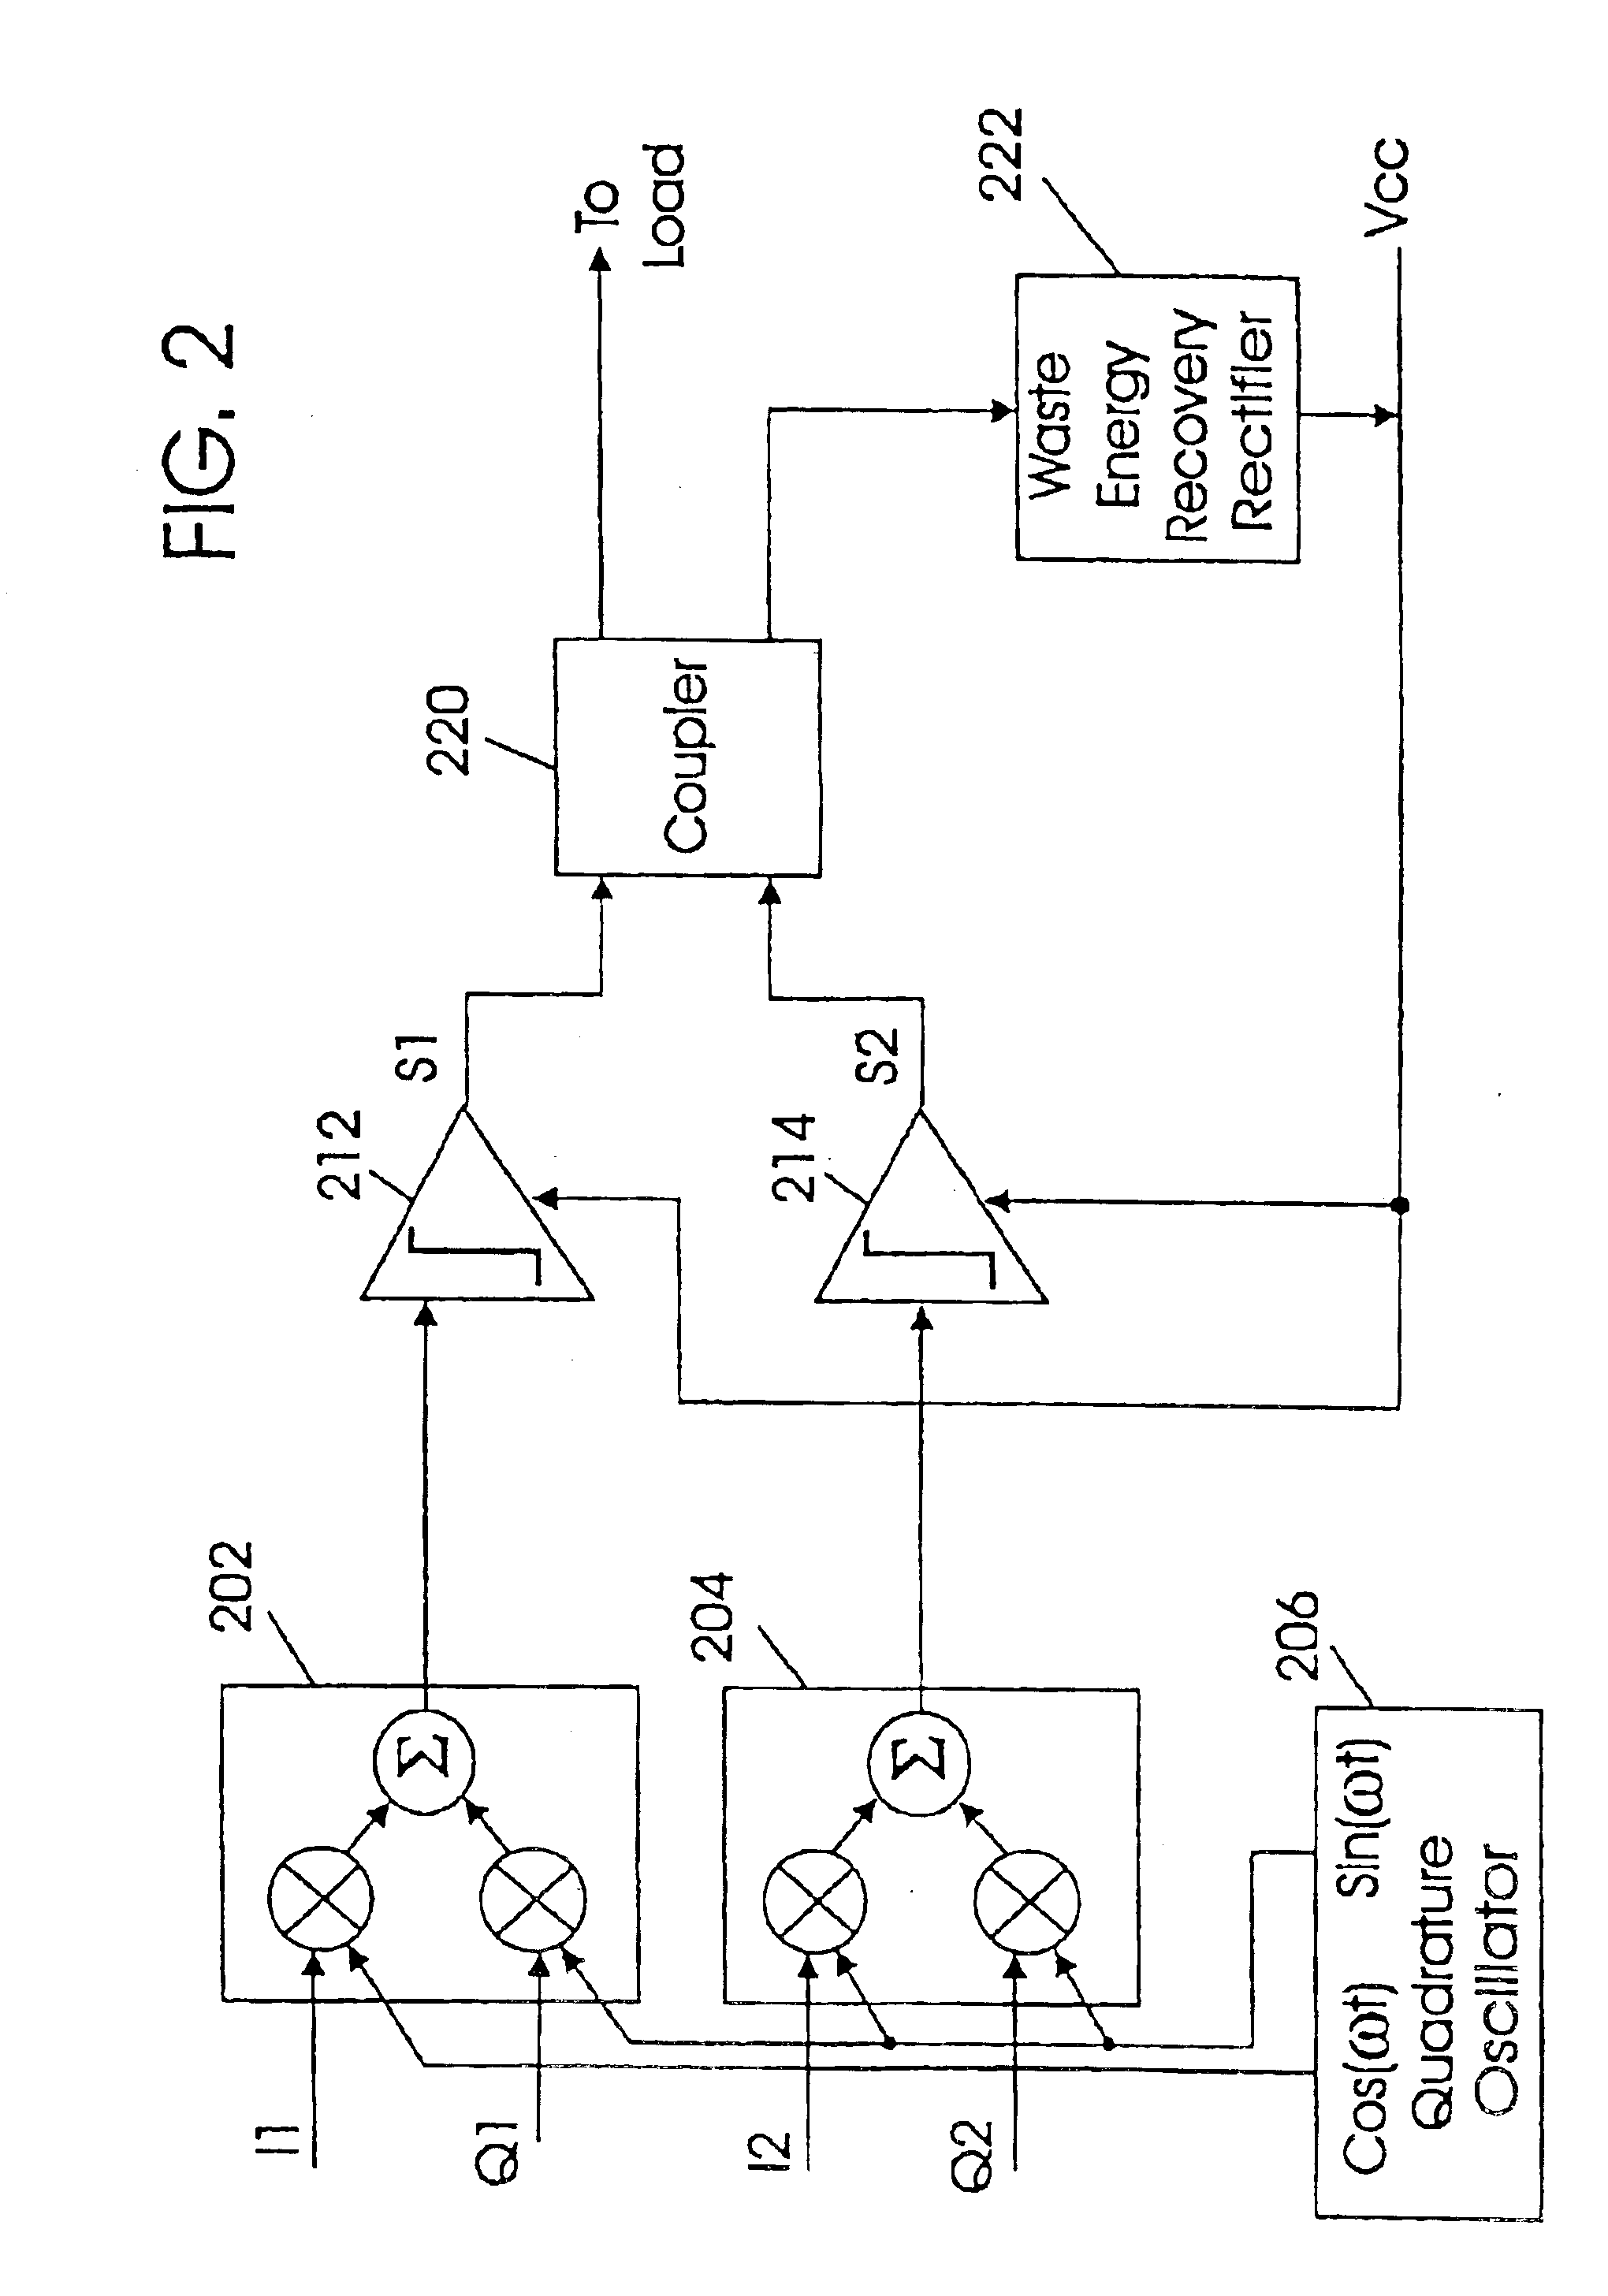 Antenna coupling systems and methods for transmitters